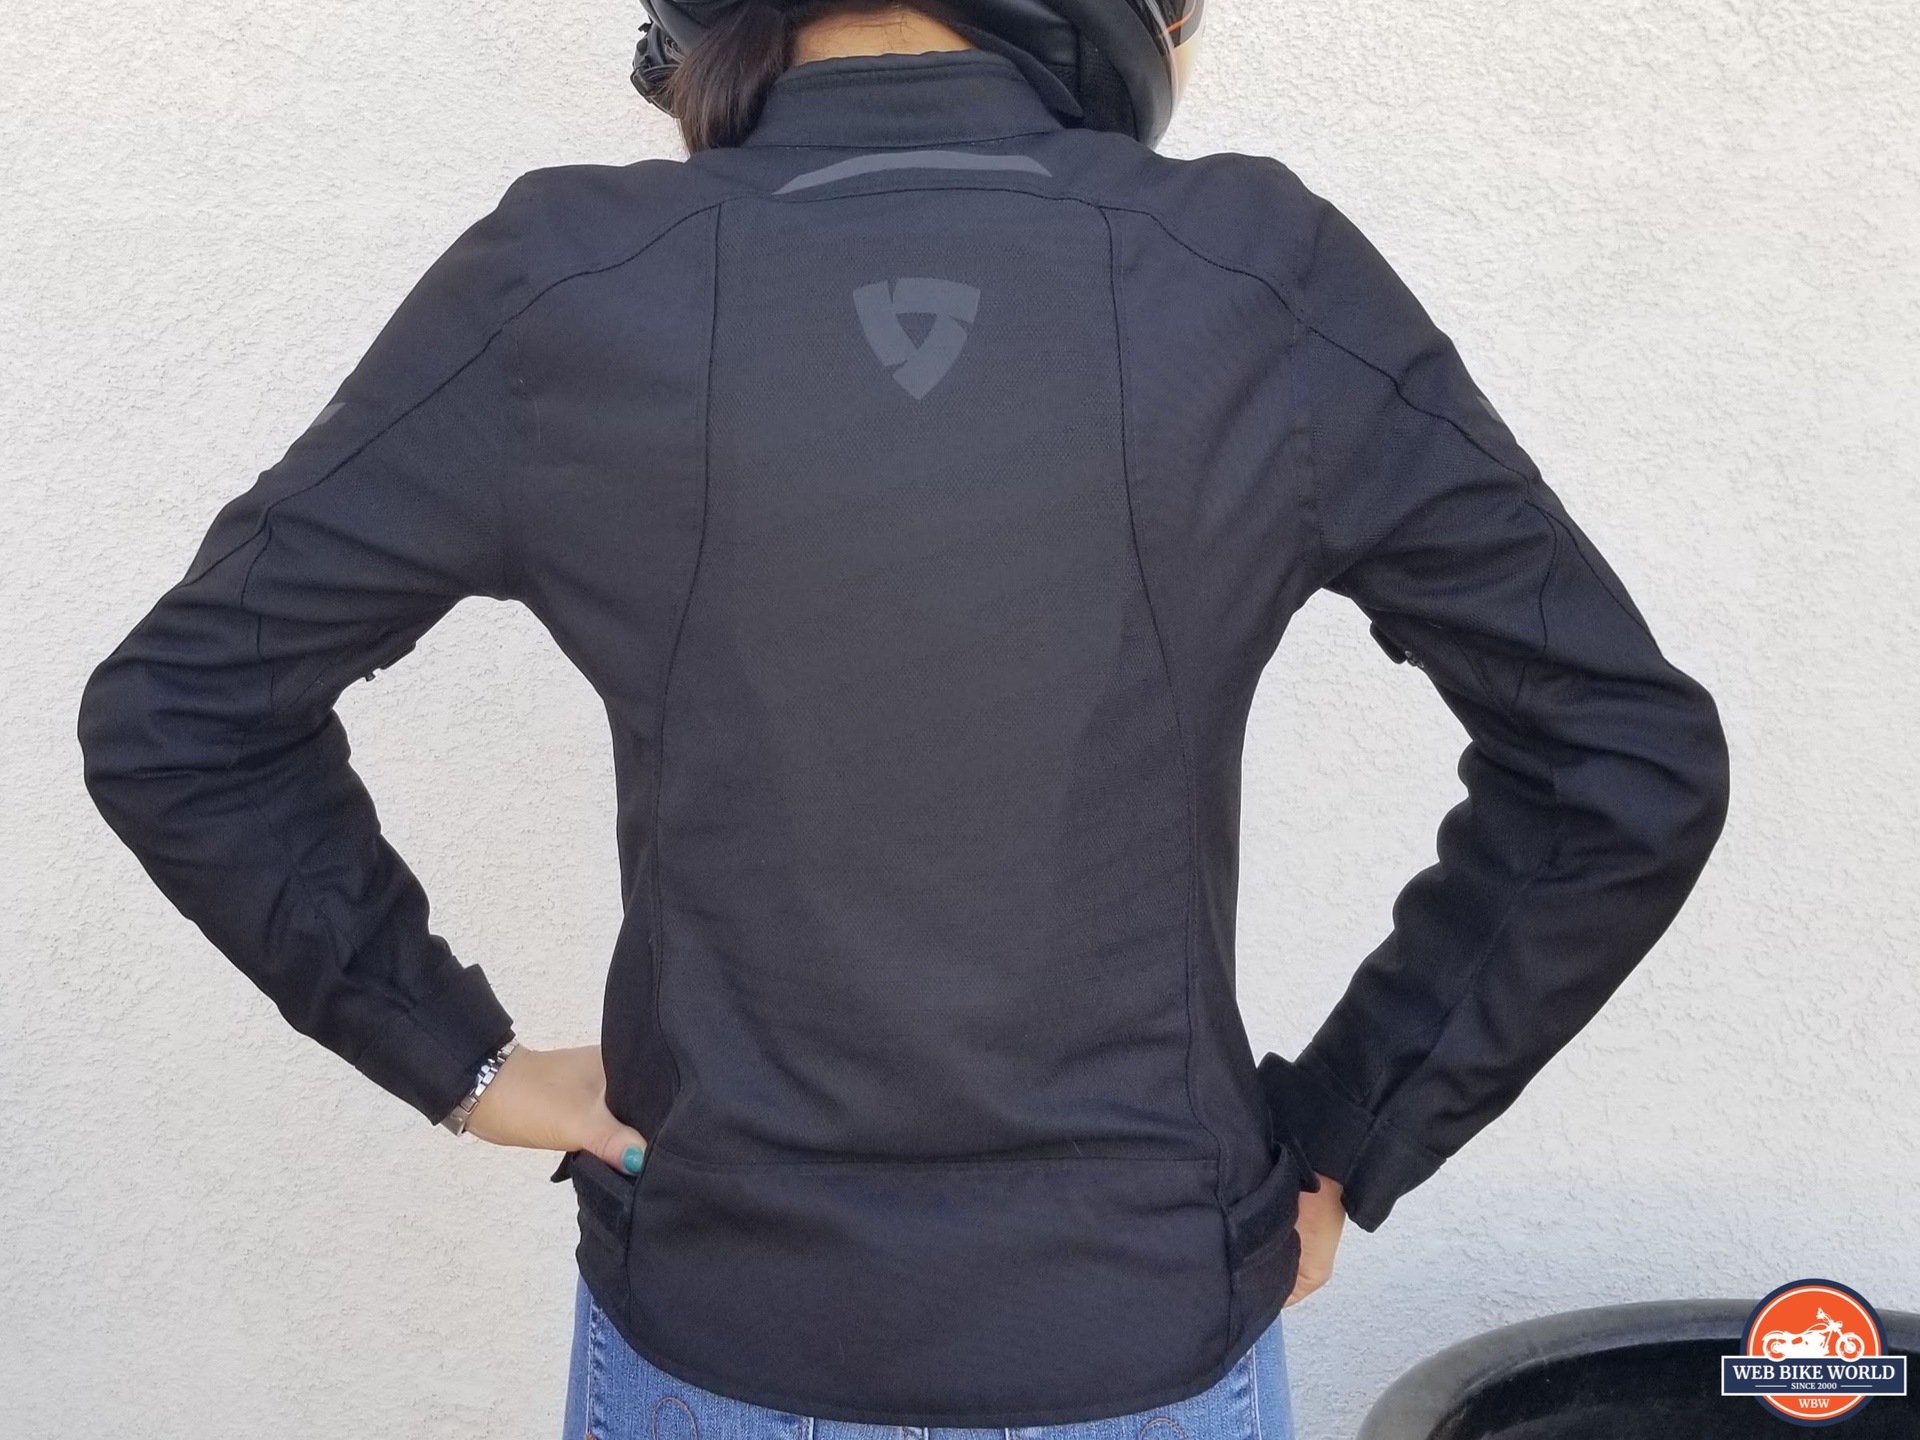 Rev'It!  Torque 2 H2O women's jacket with back protector insert.